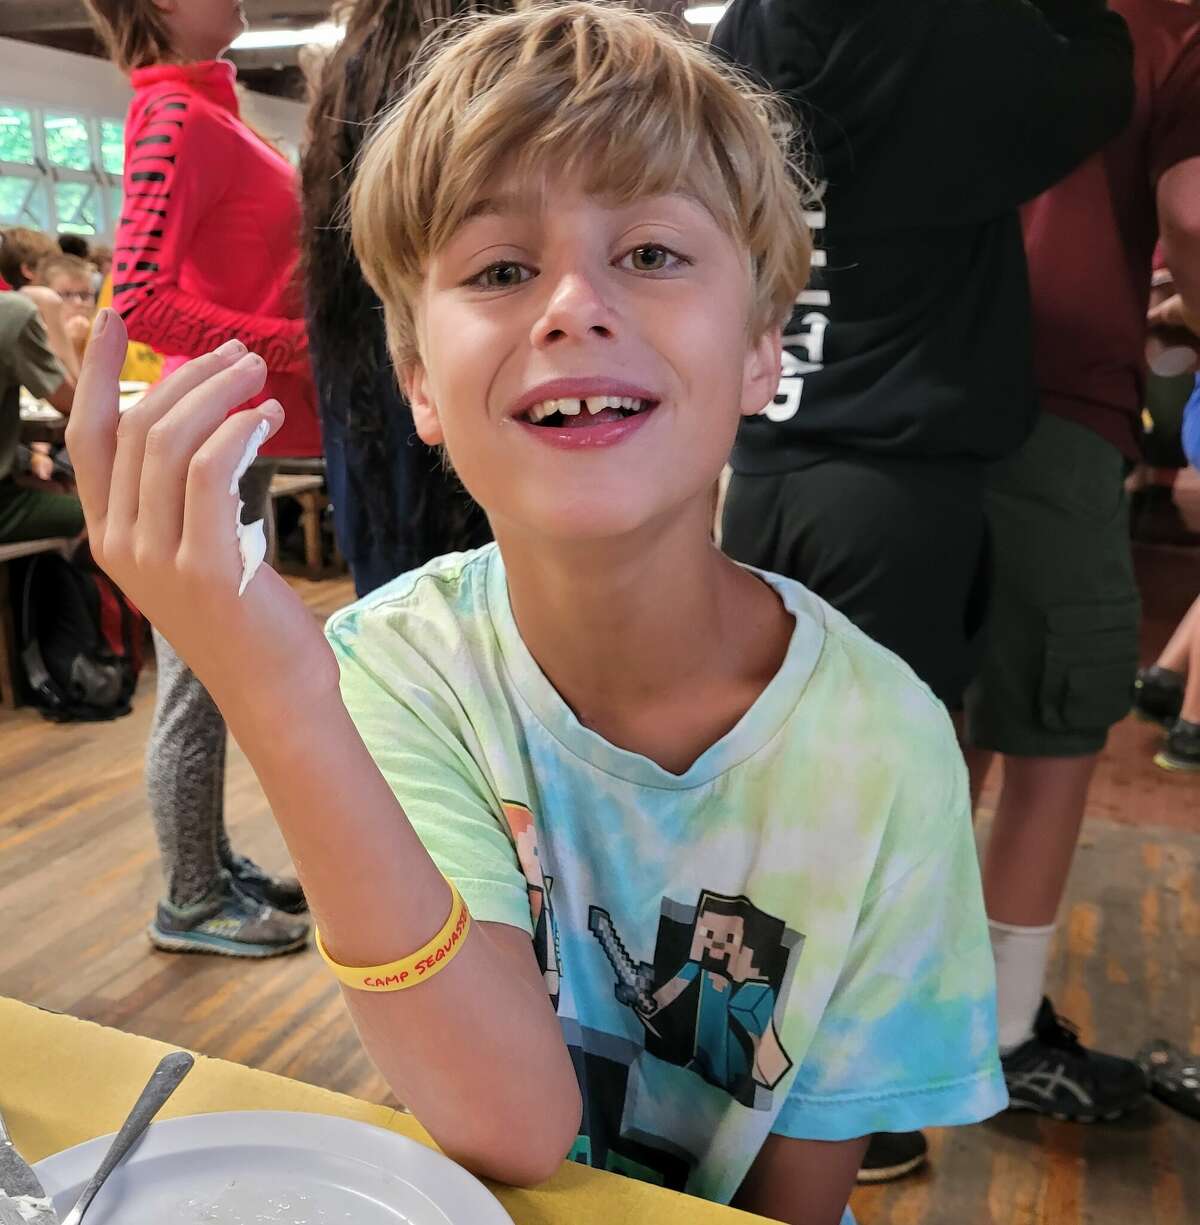 Brien Karlson, an 11-year-old Redding middle school student who died Wednesday after suffering injuries in a fire at his family home, was remembered as an avid outdoorsman and a compassionate animal lover in a statement reportedly issued by his family.